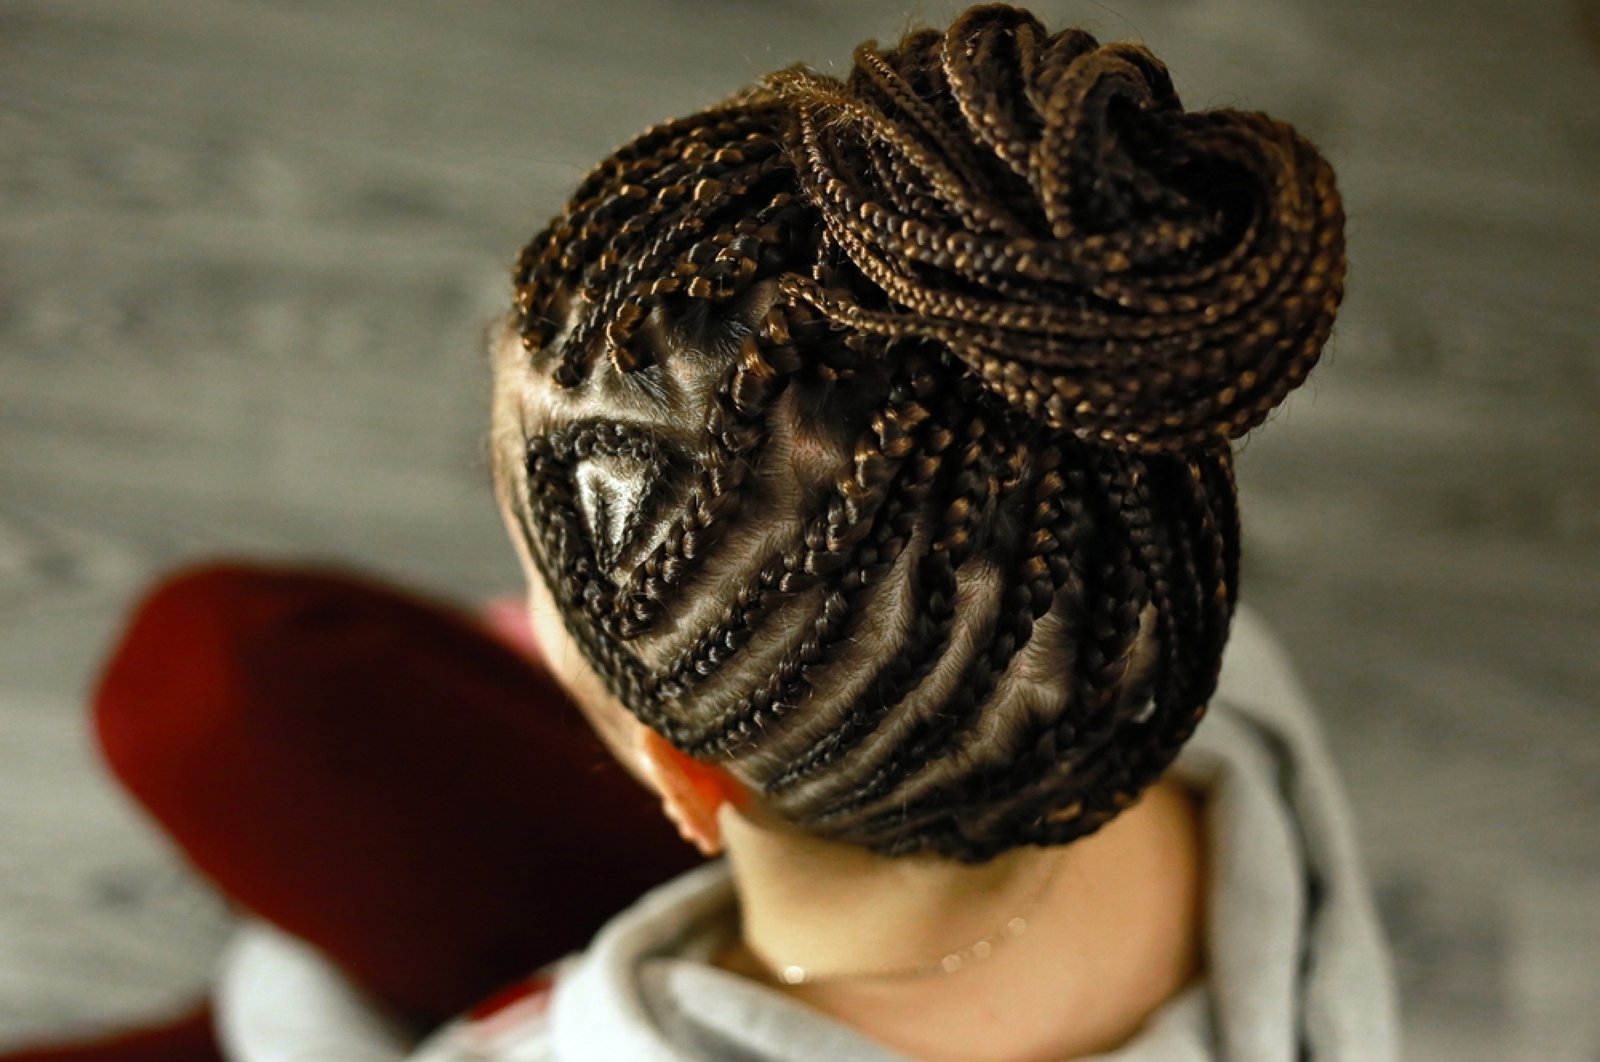 More than hairstyle: African braids reflect culture, history | Daily Sabah